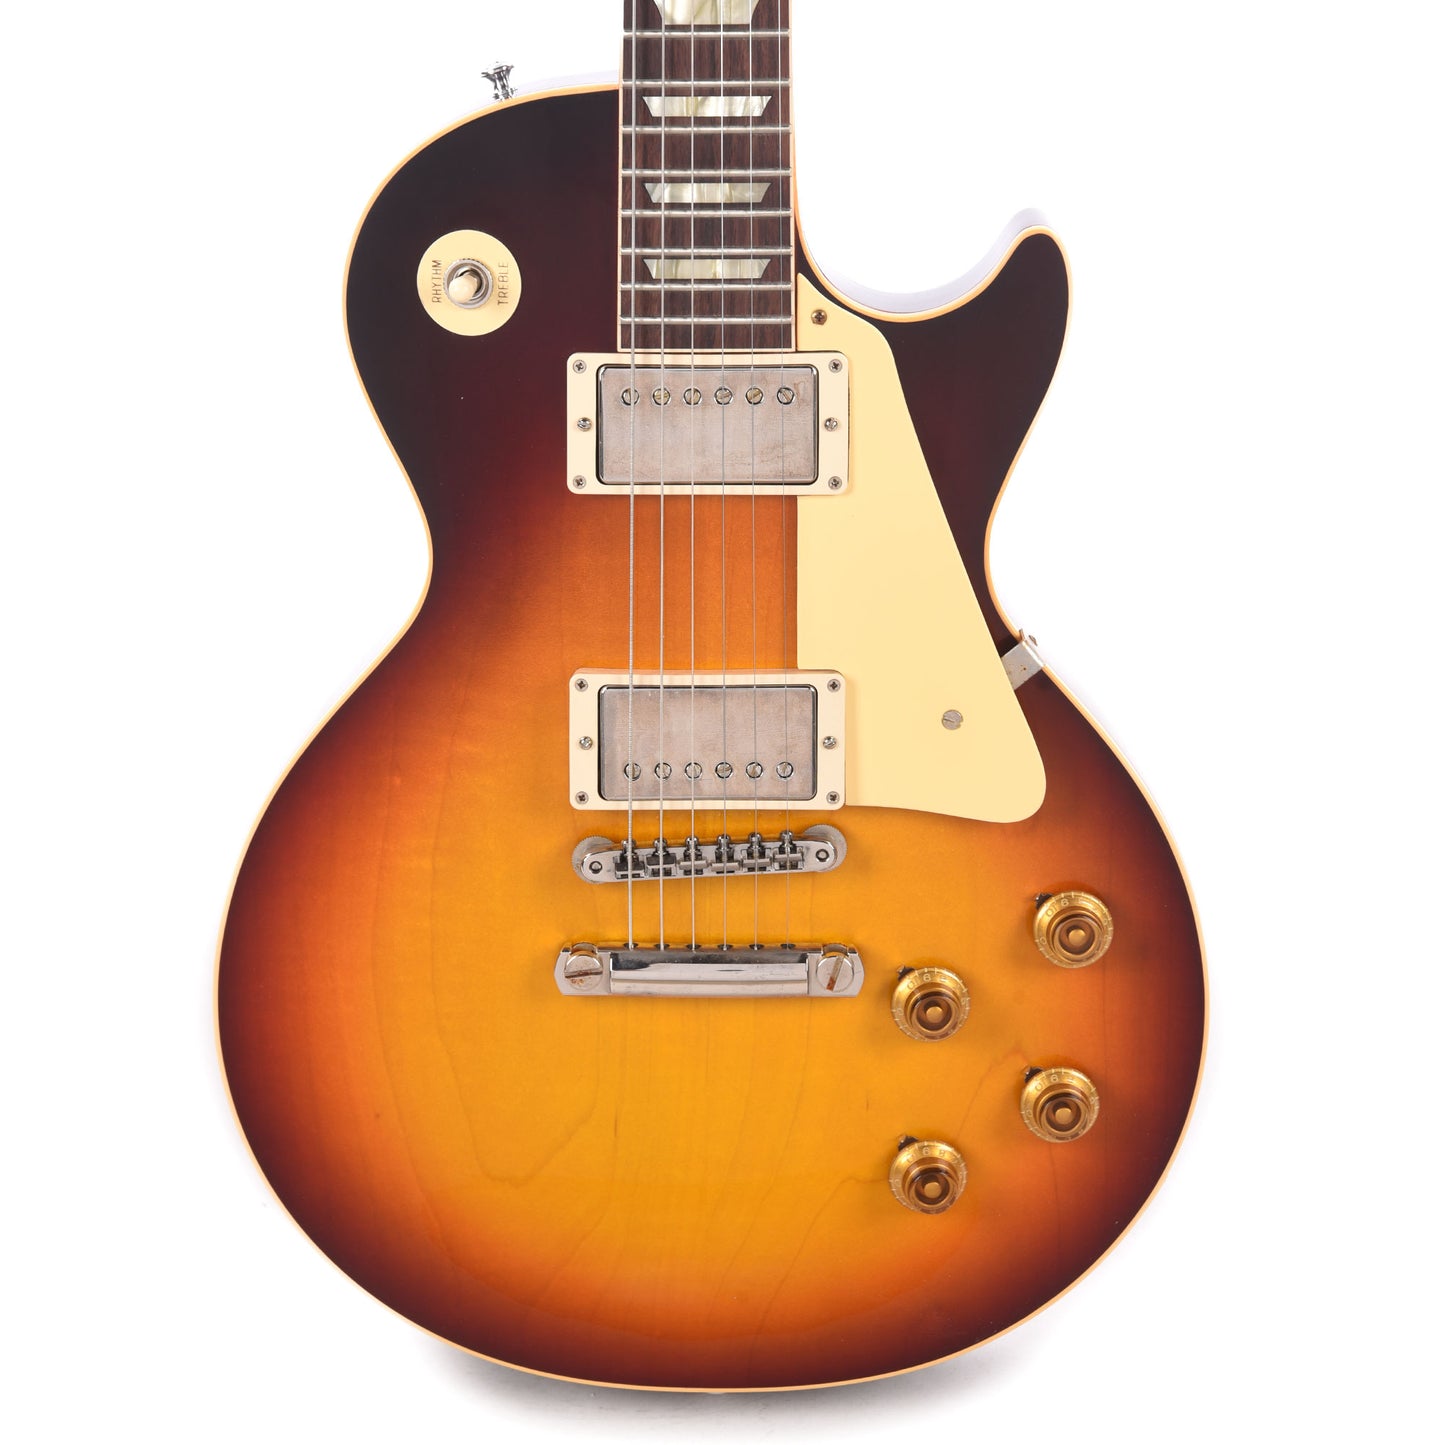 Gibson Custom Shop 1958 Les Paul Standard "CME Spec" Southern Fade VOS w/60 V2 Neck Profile